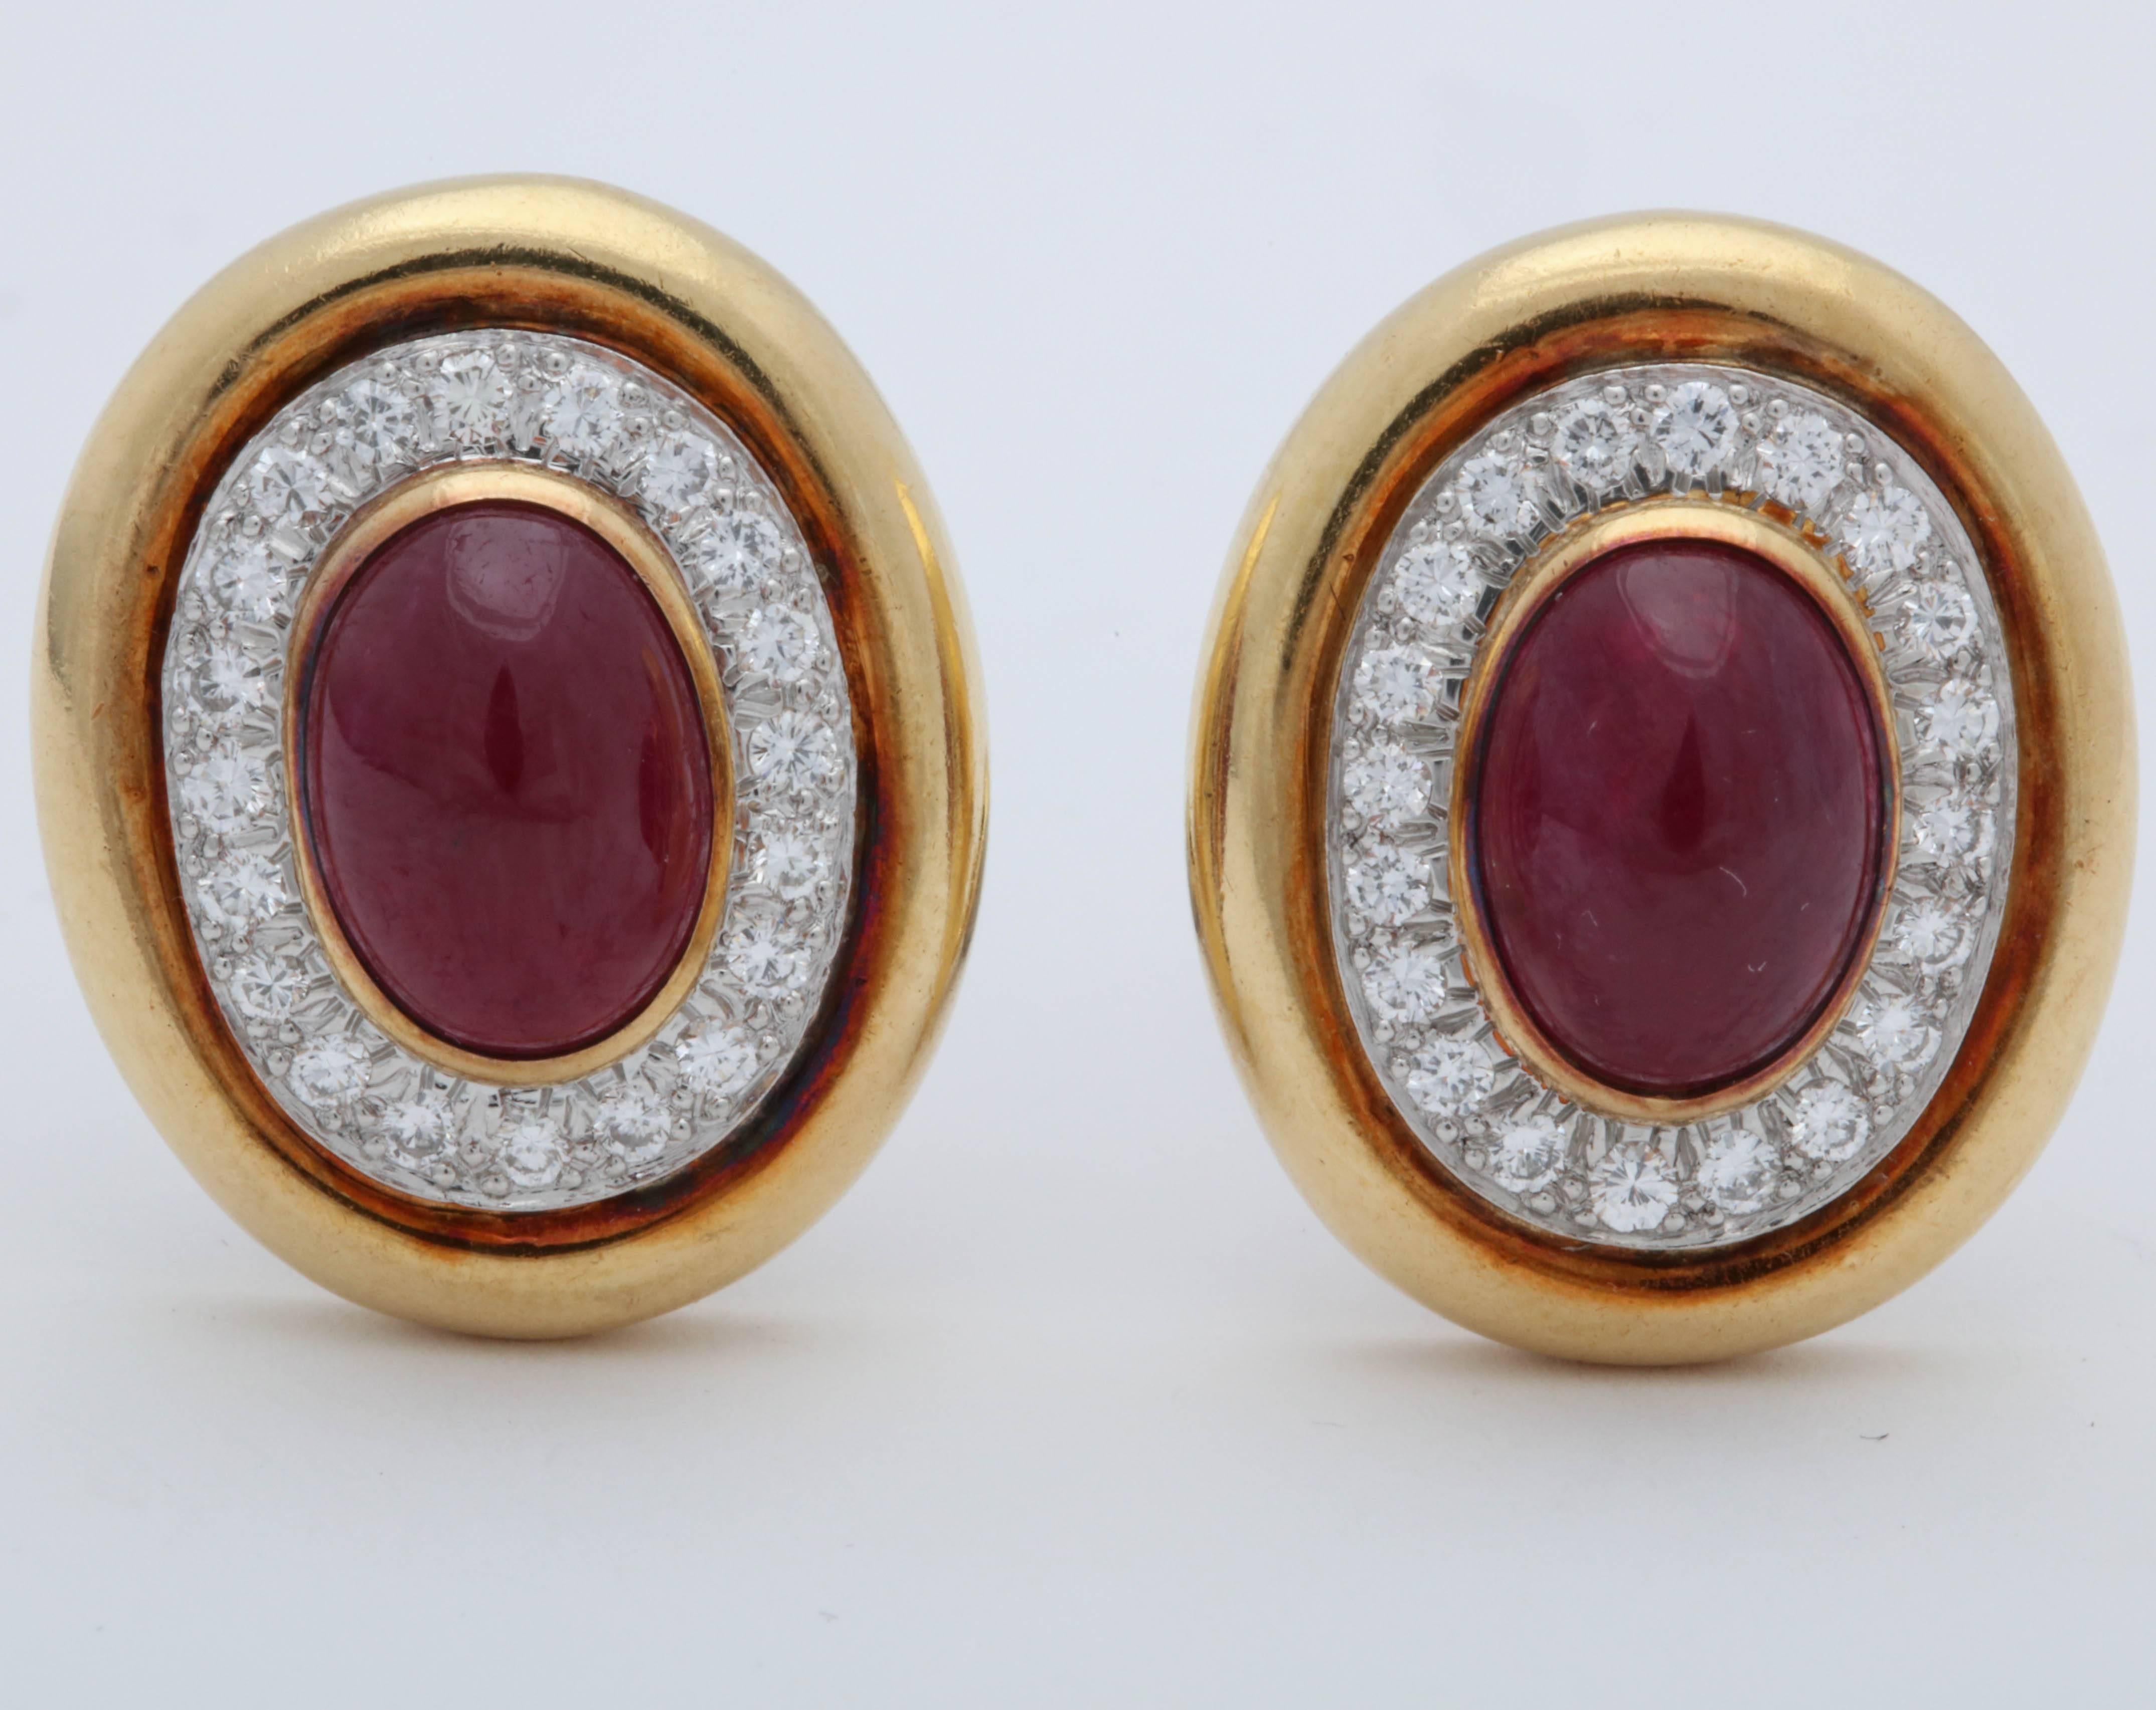 One Pair Of Ladies 18kt Yellow Gold Clip Back Earrings Centering A 20MM Each Cabochon Ruby Weighing approximately Three Carats . Rubies Are Surrounde By Numerous High Quality Full cut diamonds Weighing Approximately Two Carats Total weight.NOTE: All